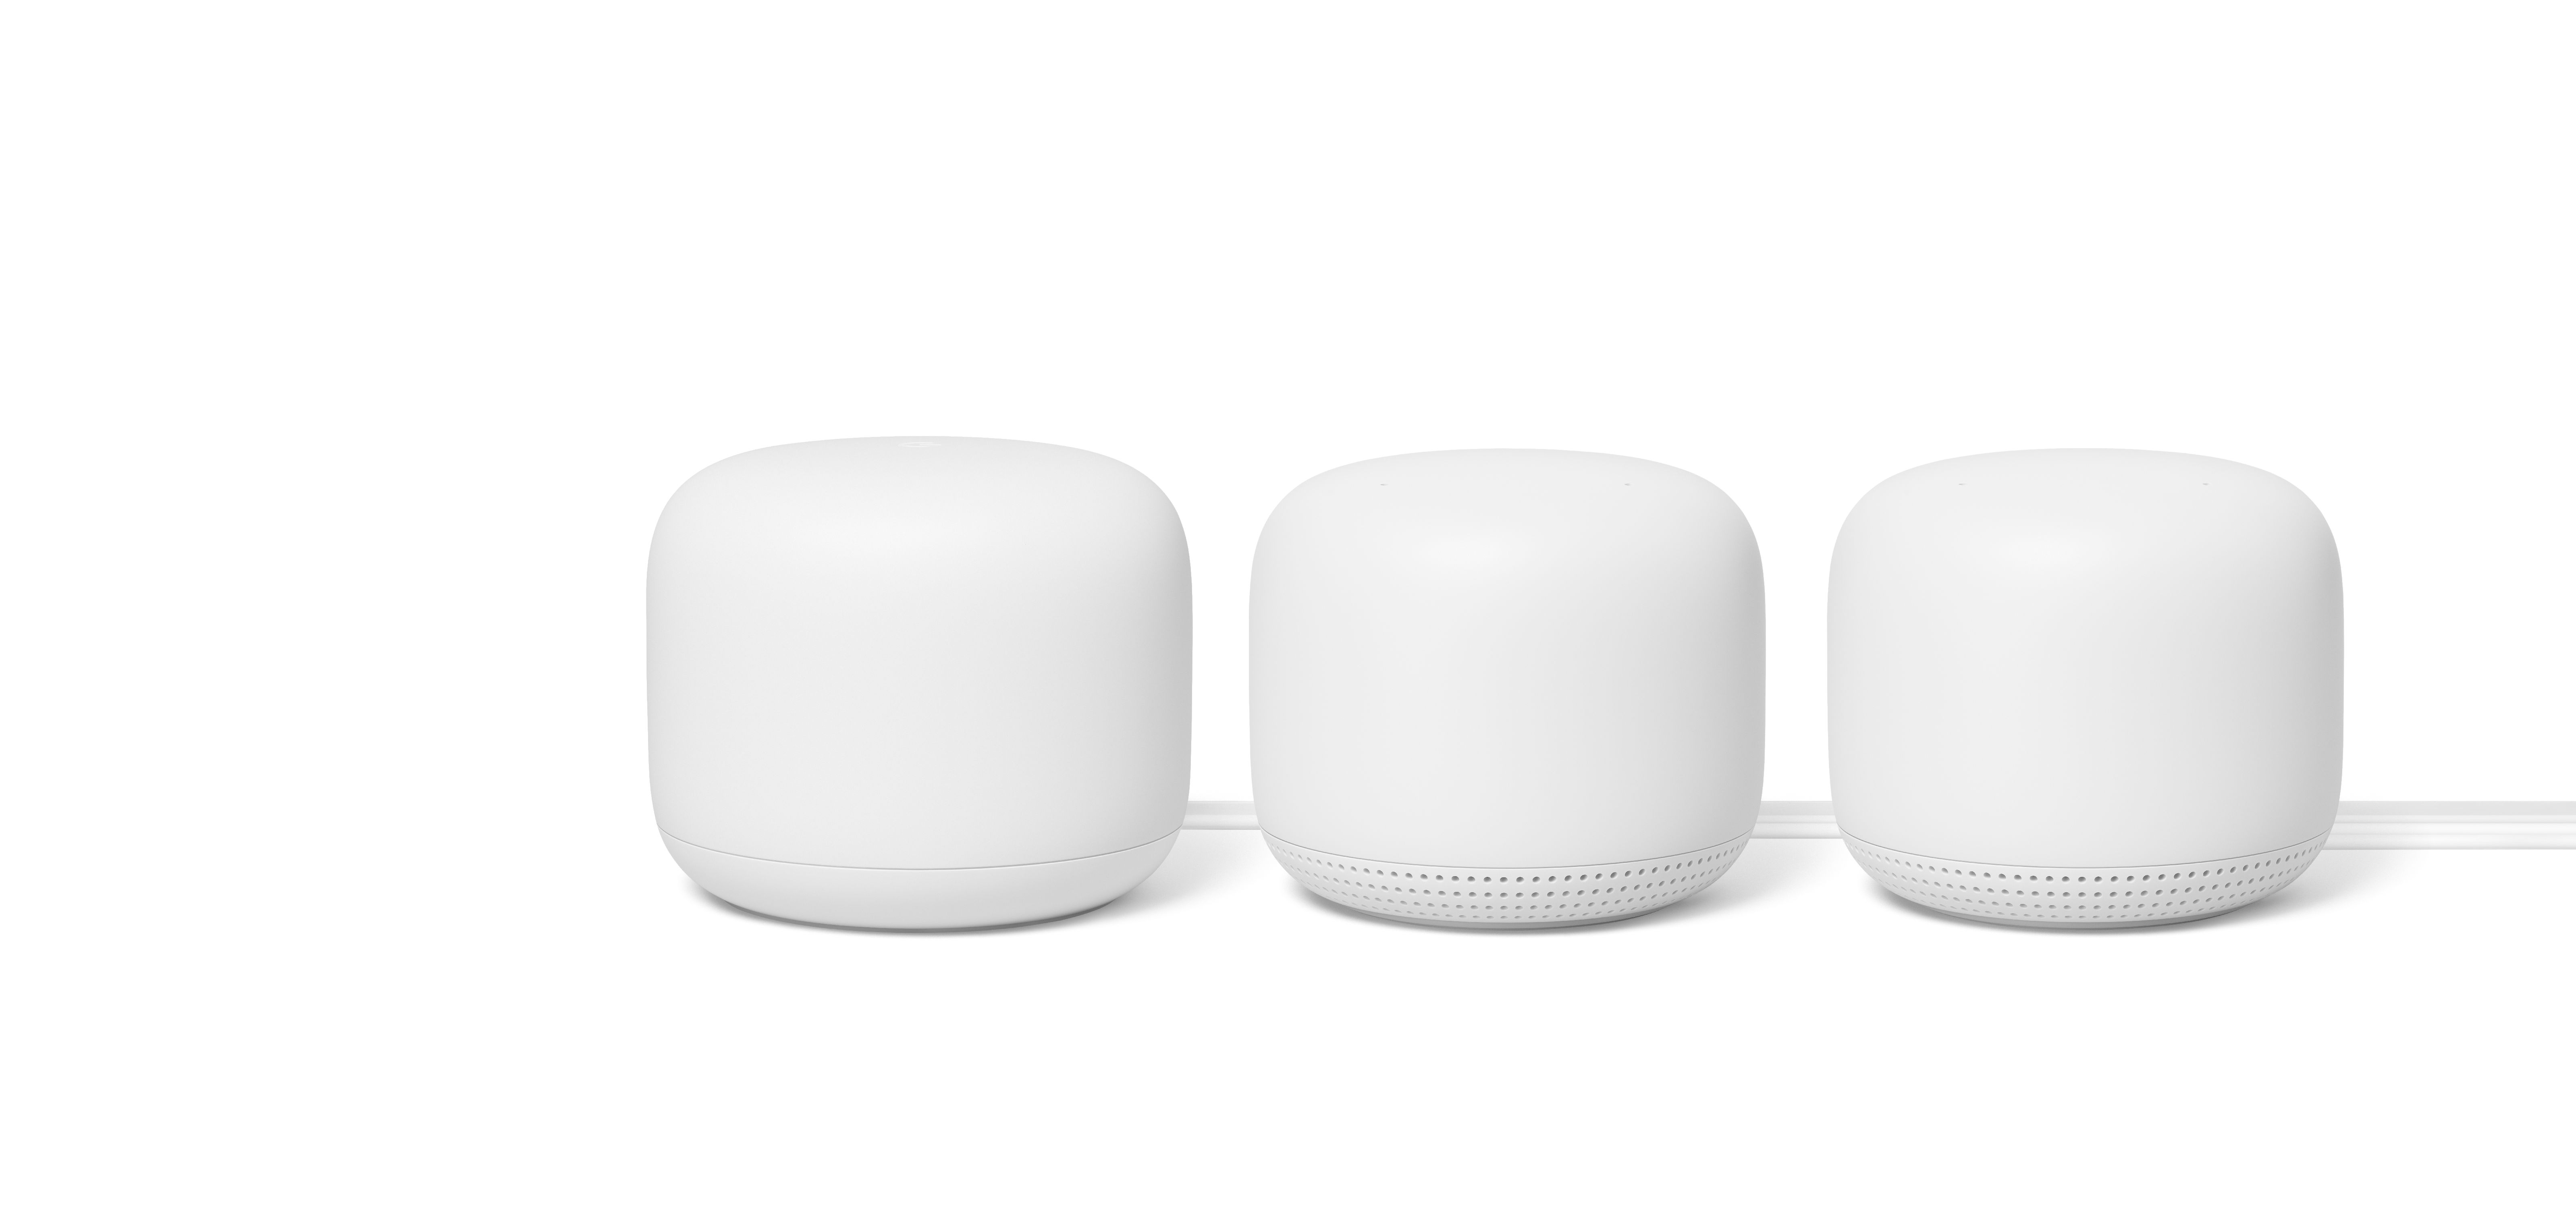 Google Nest Wifi 3 Pack (AC2200 Mesh Router with 2 Points) - $174.50 Walmart YMMV